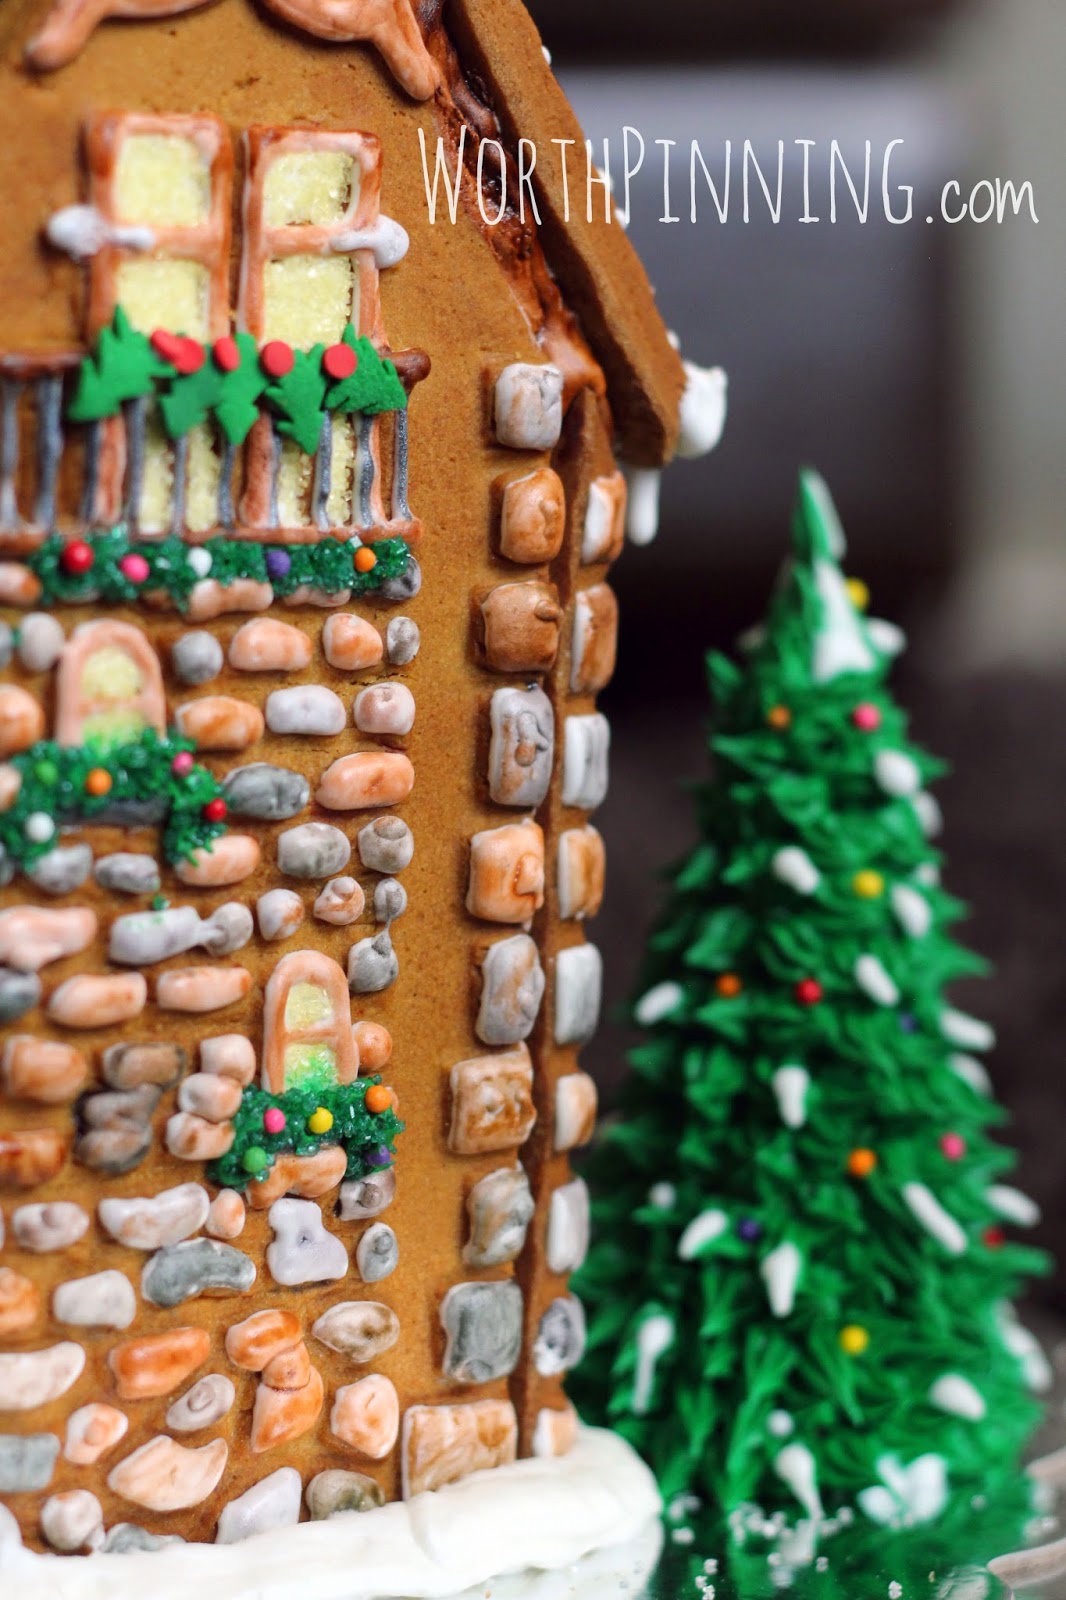 Gingerbread House Ideas, Inspiration, and Holiday Baking.